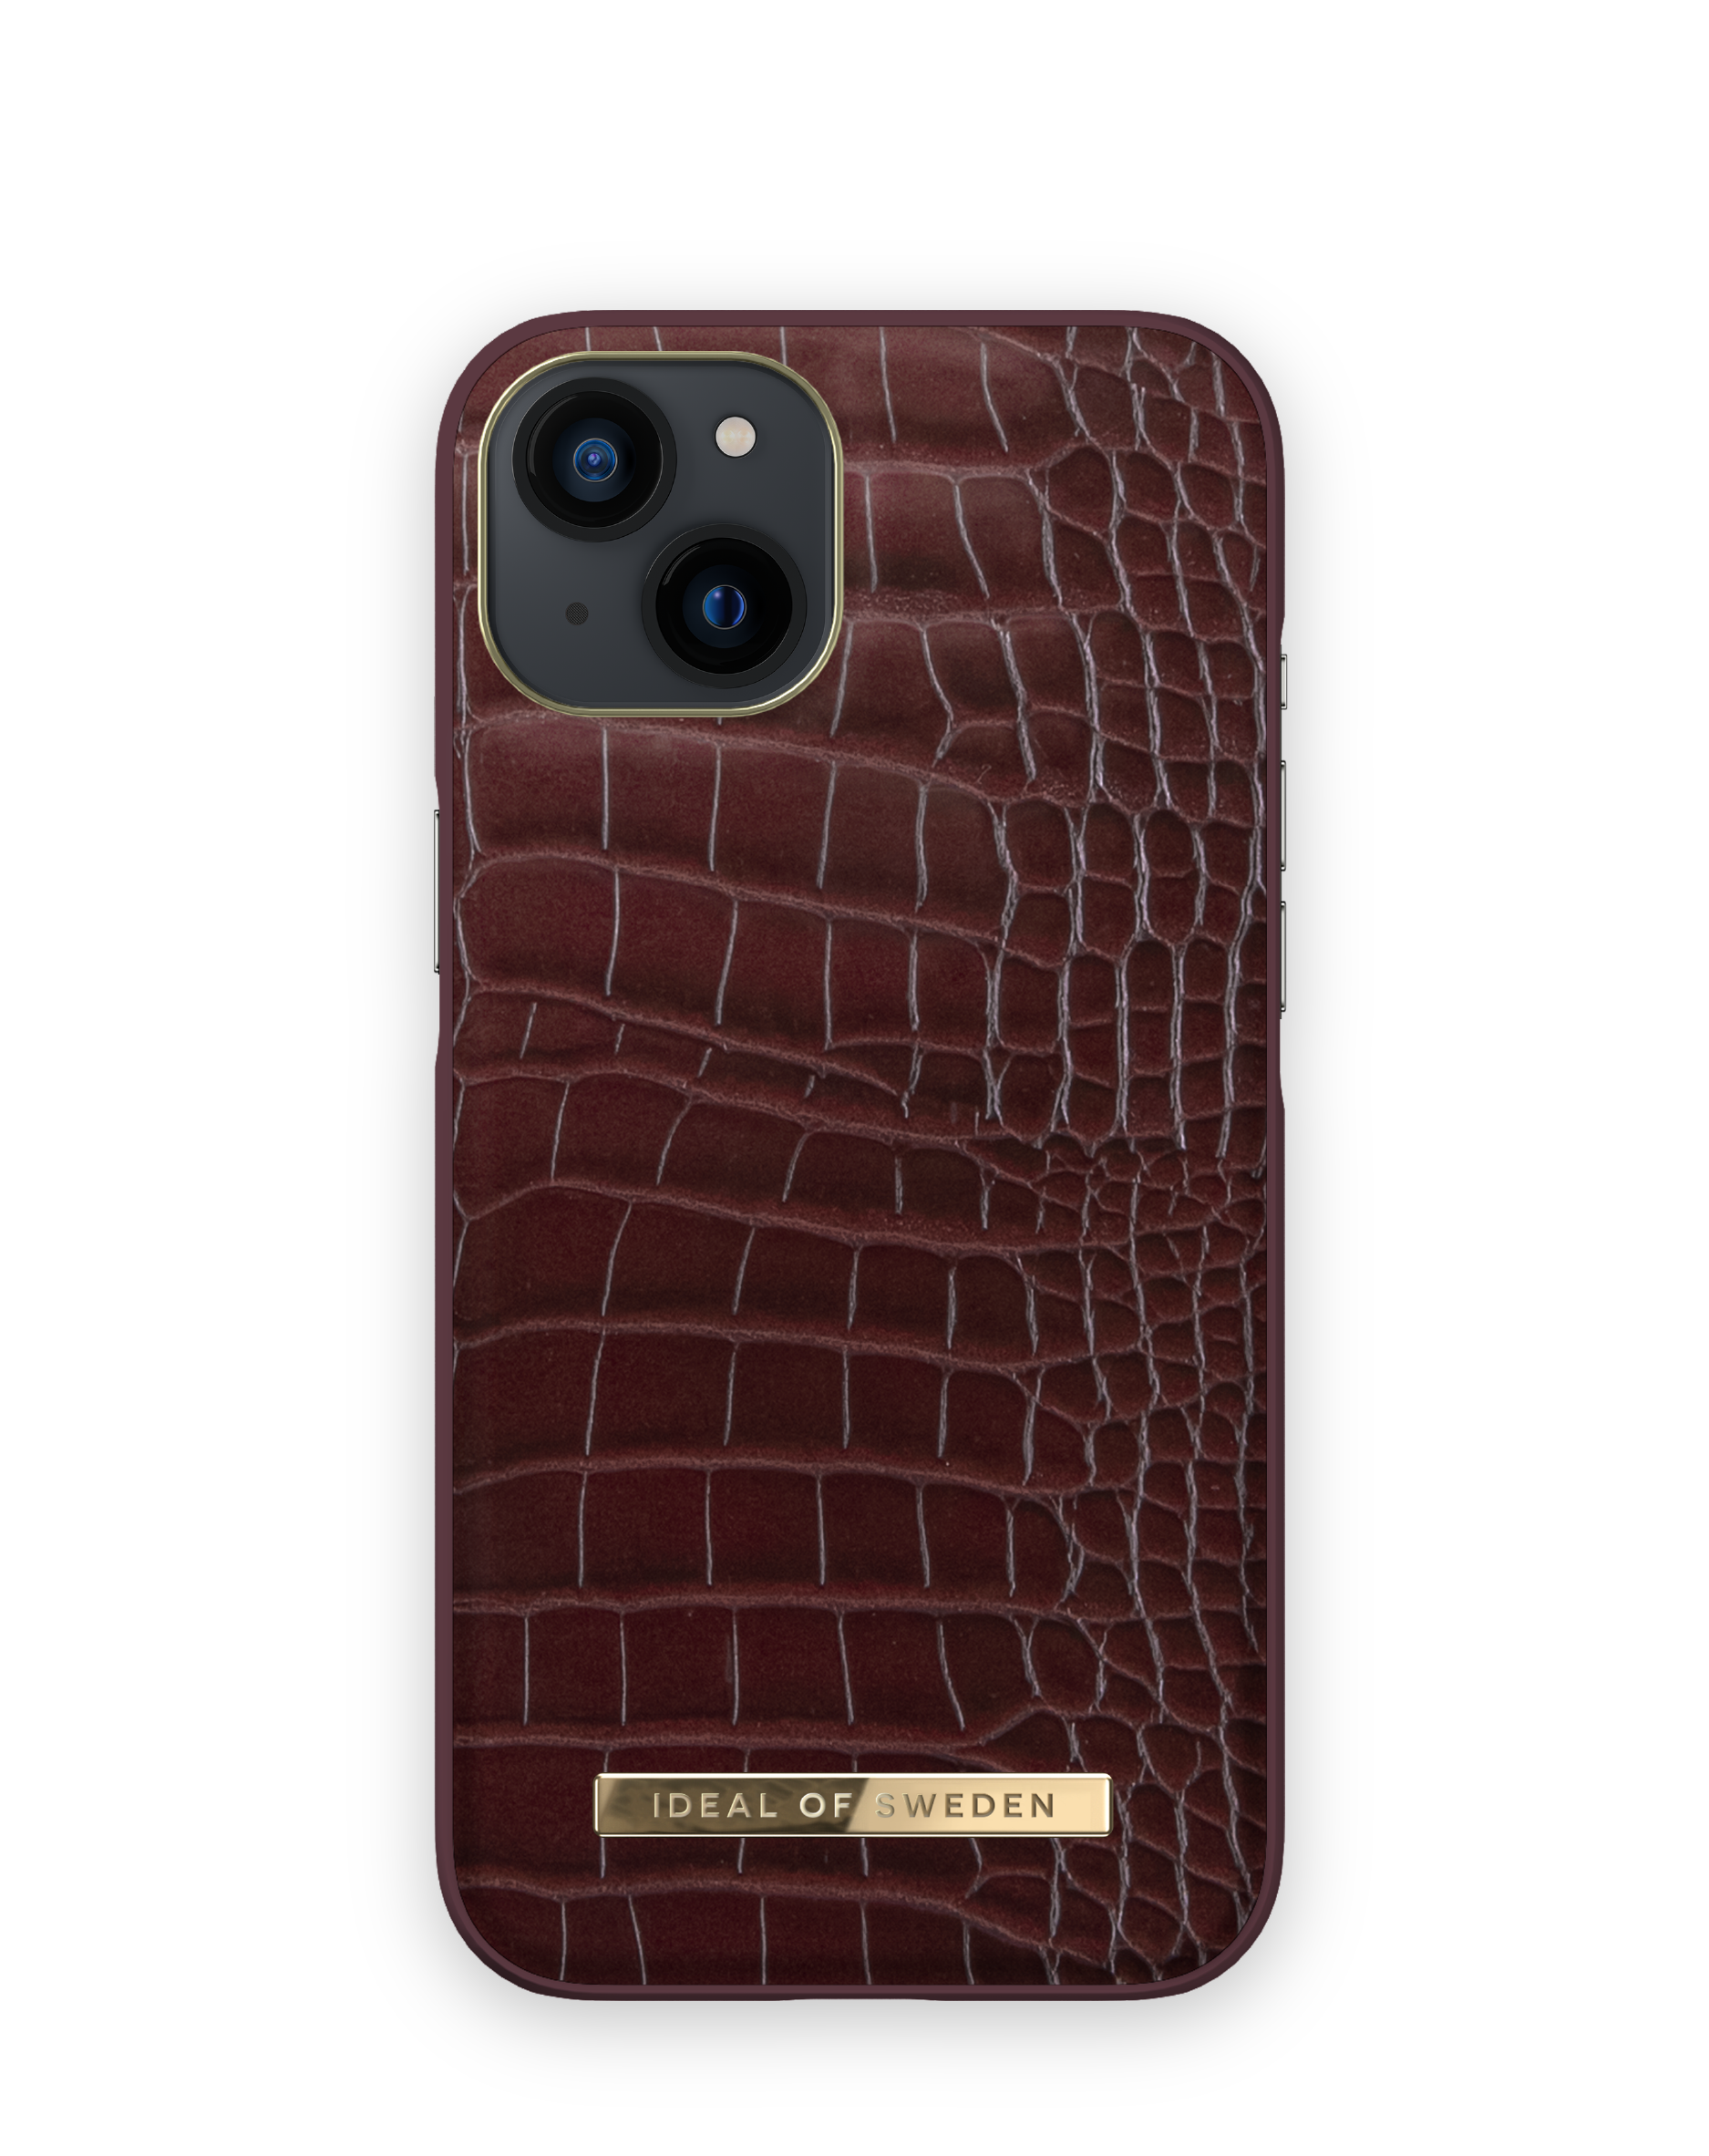 IDEAL Backcover, IDACAW21-I2161-326, OF Croco iPhone Scarlet SWEDEN Apple, 13,